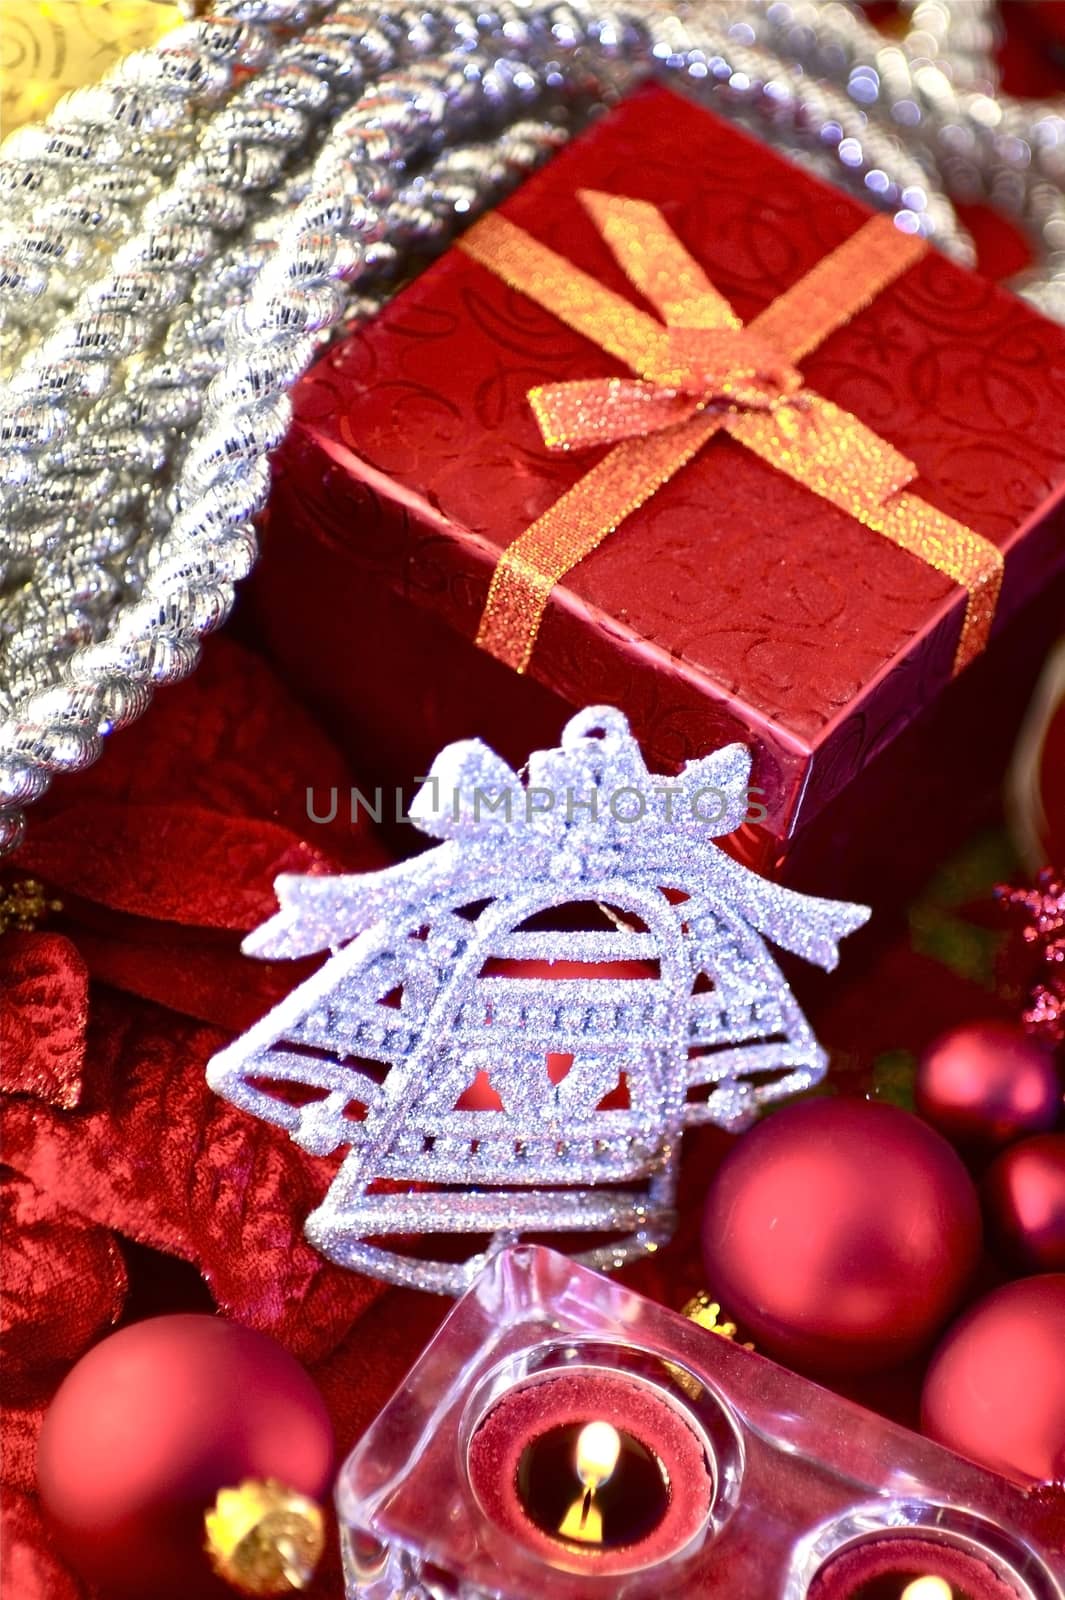 Holiday Ornaments. Red Present Box, Silver Bell Ornament and Some Candles. Holidays Photo Collection